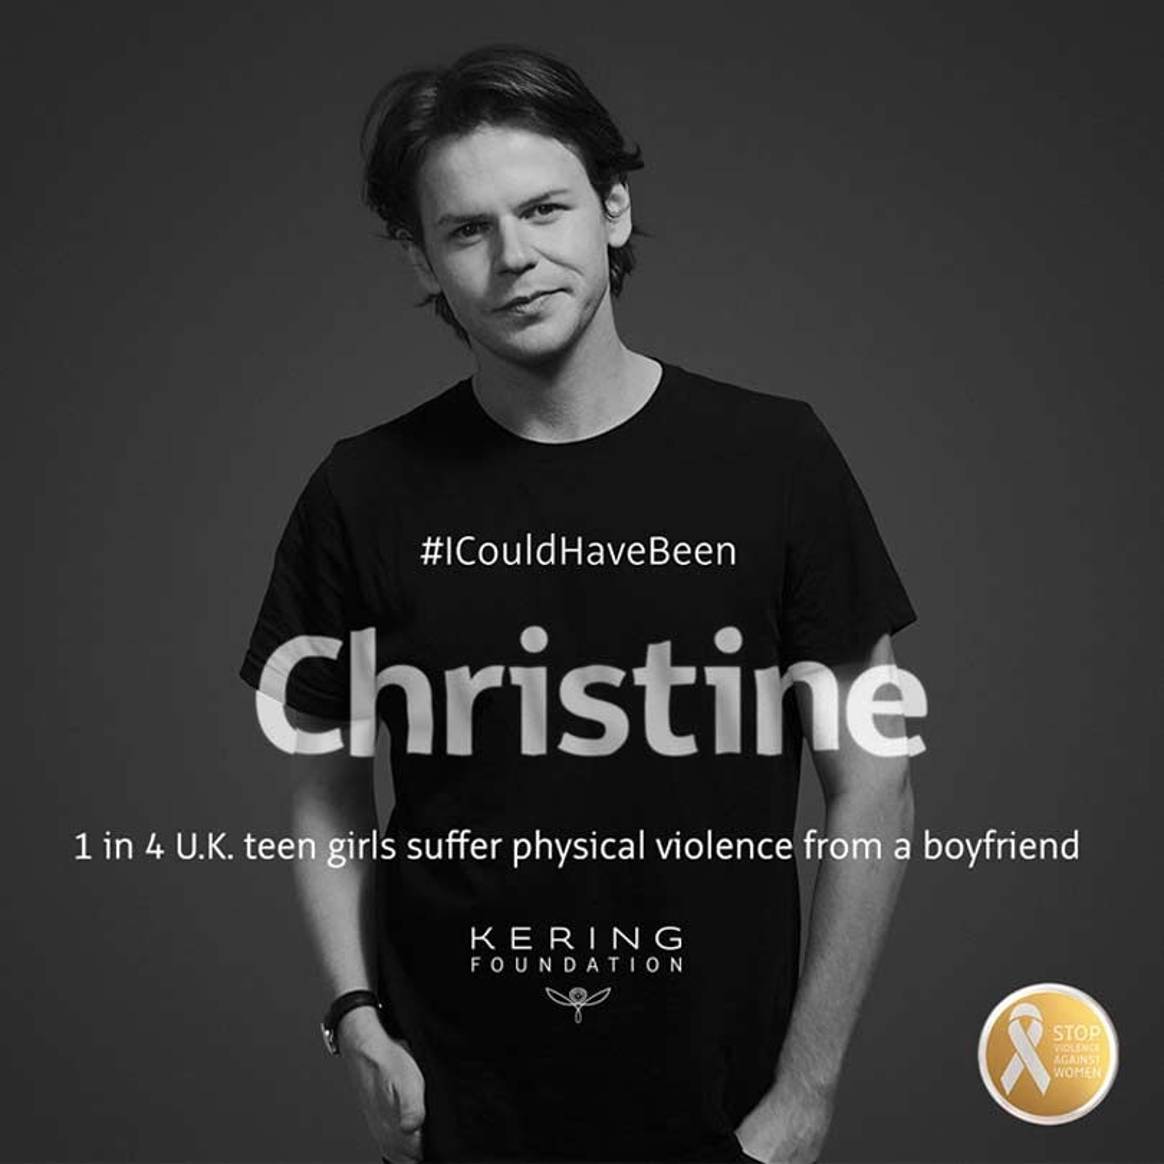 #ICouldHaveBeen: Kering Foundation campaigns to end violence against women